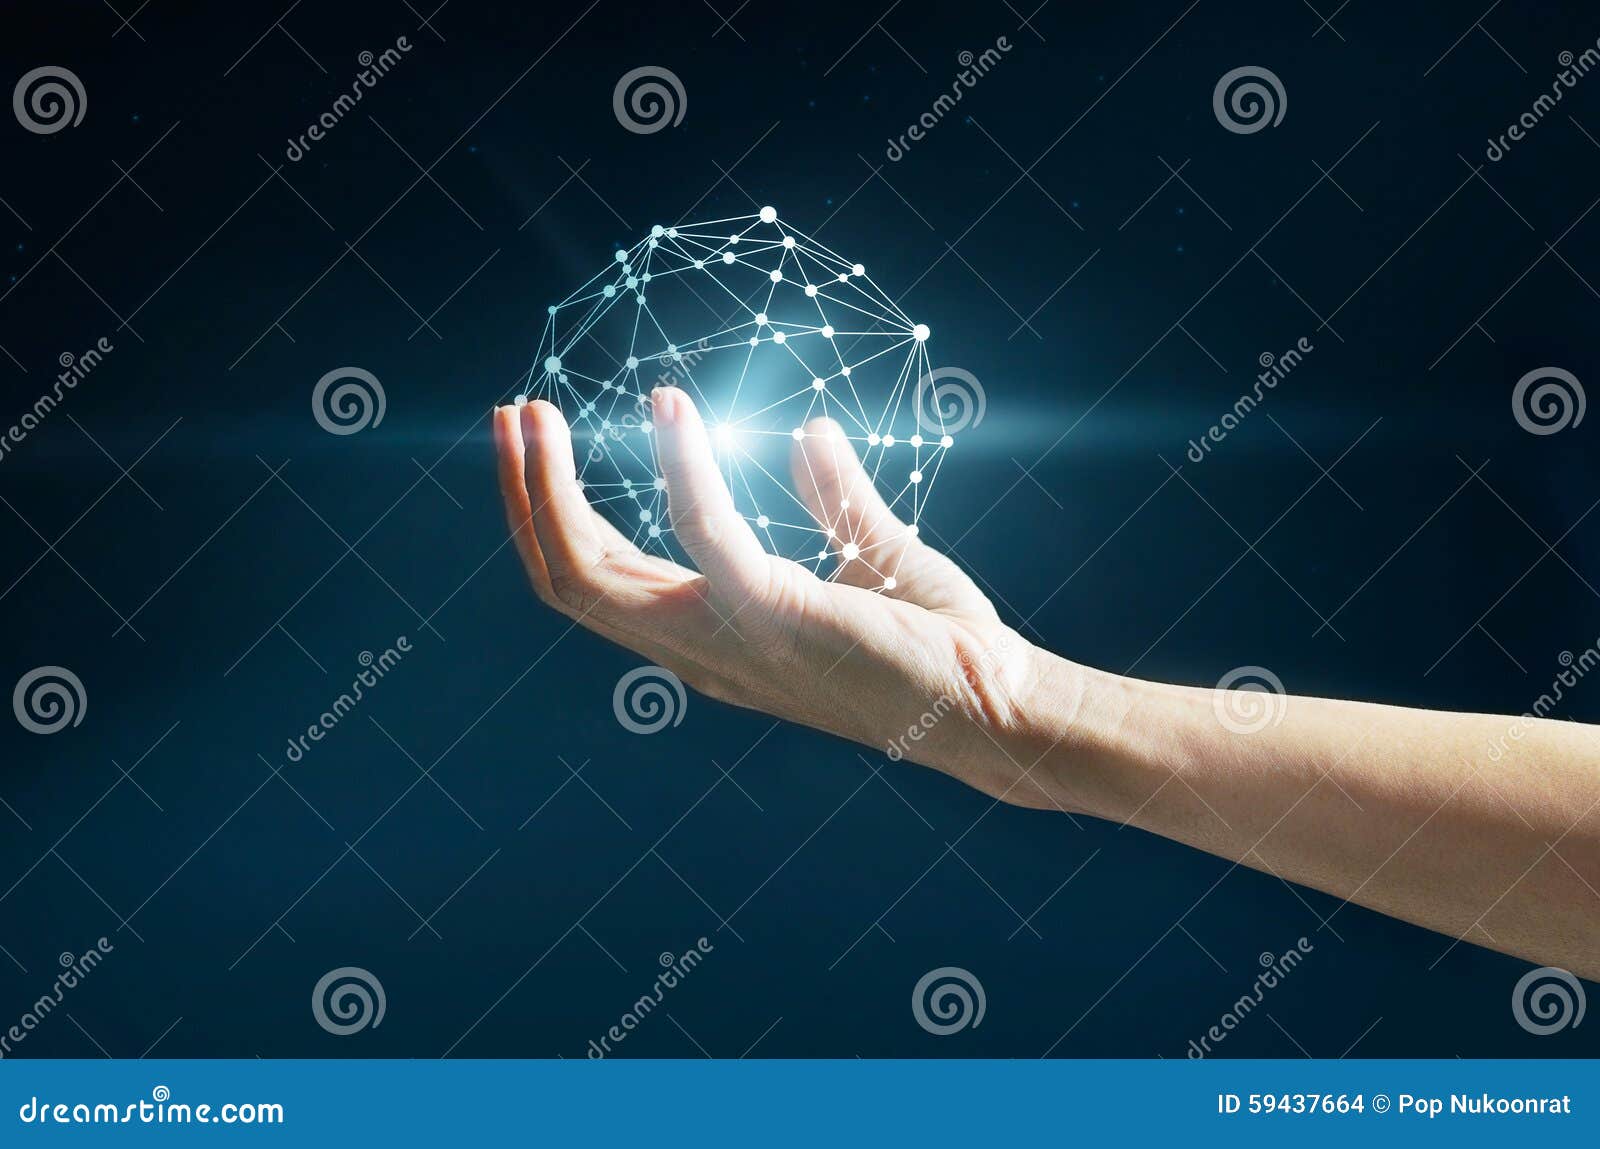 abstract science, circle global network connection in hand